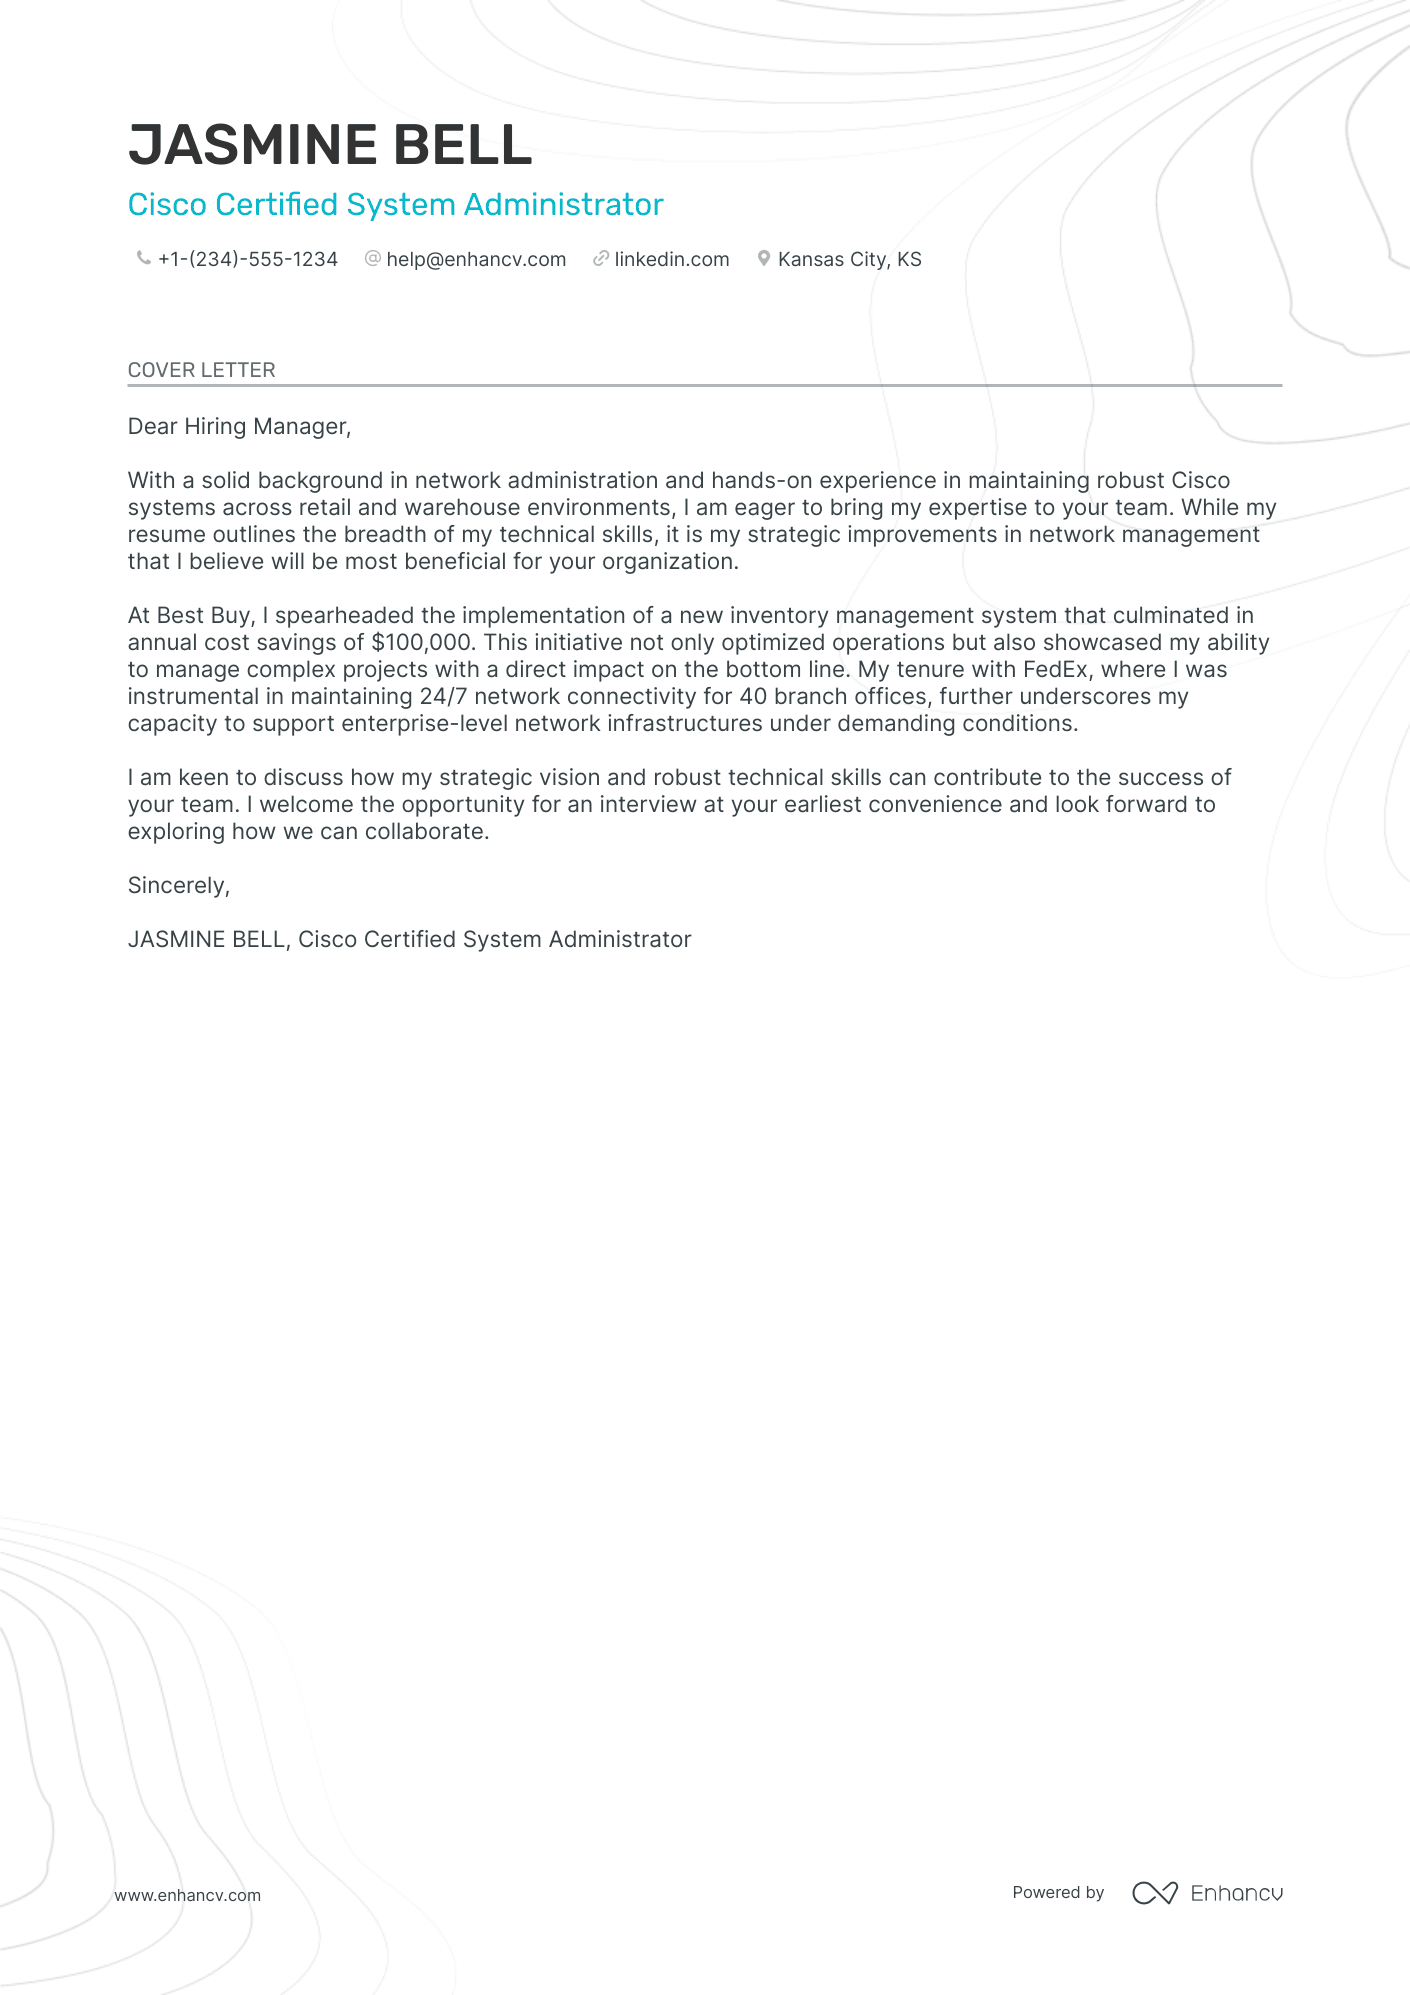 cover letter for it support role